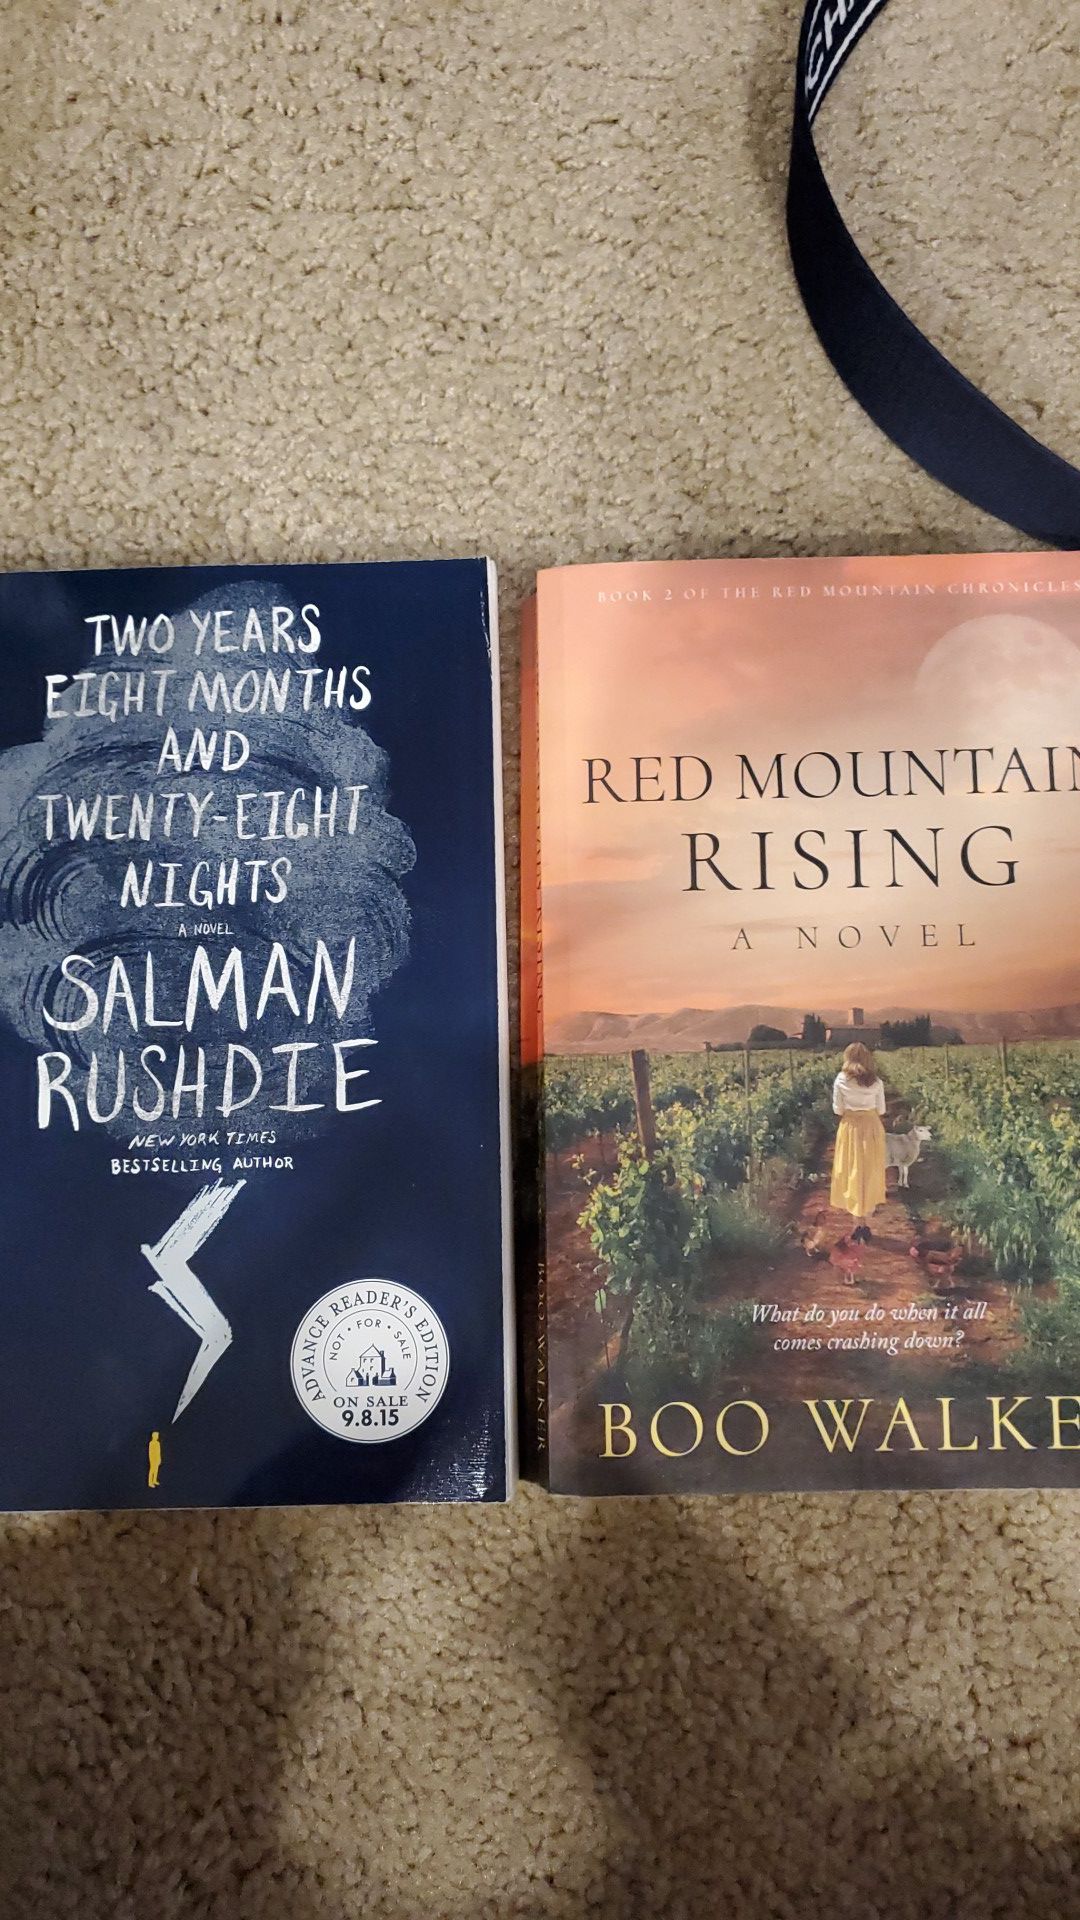 Both books for $1